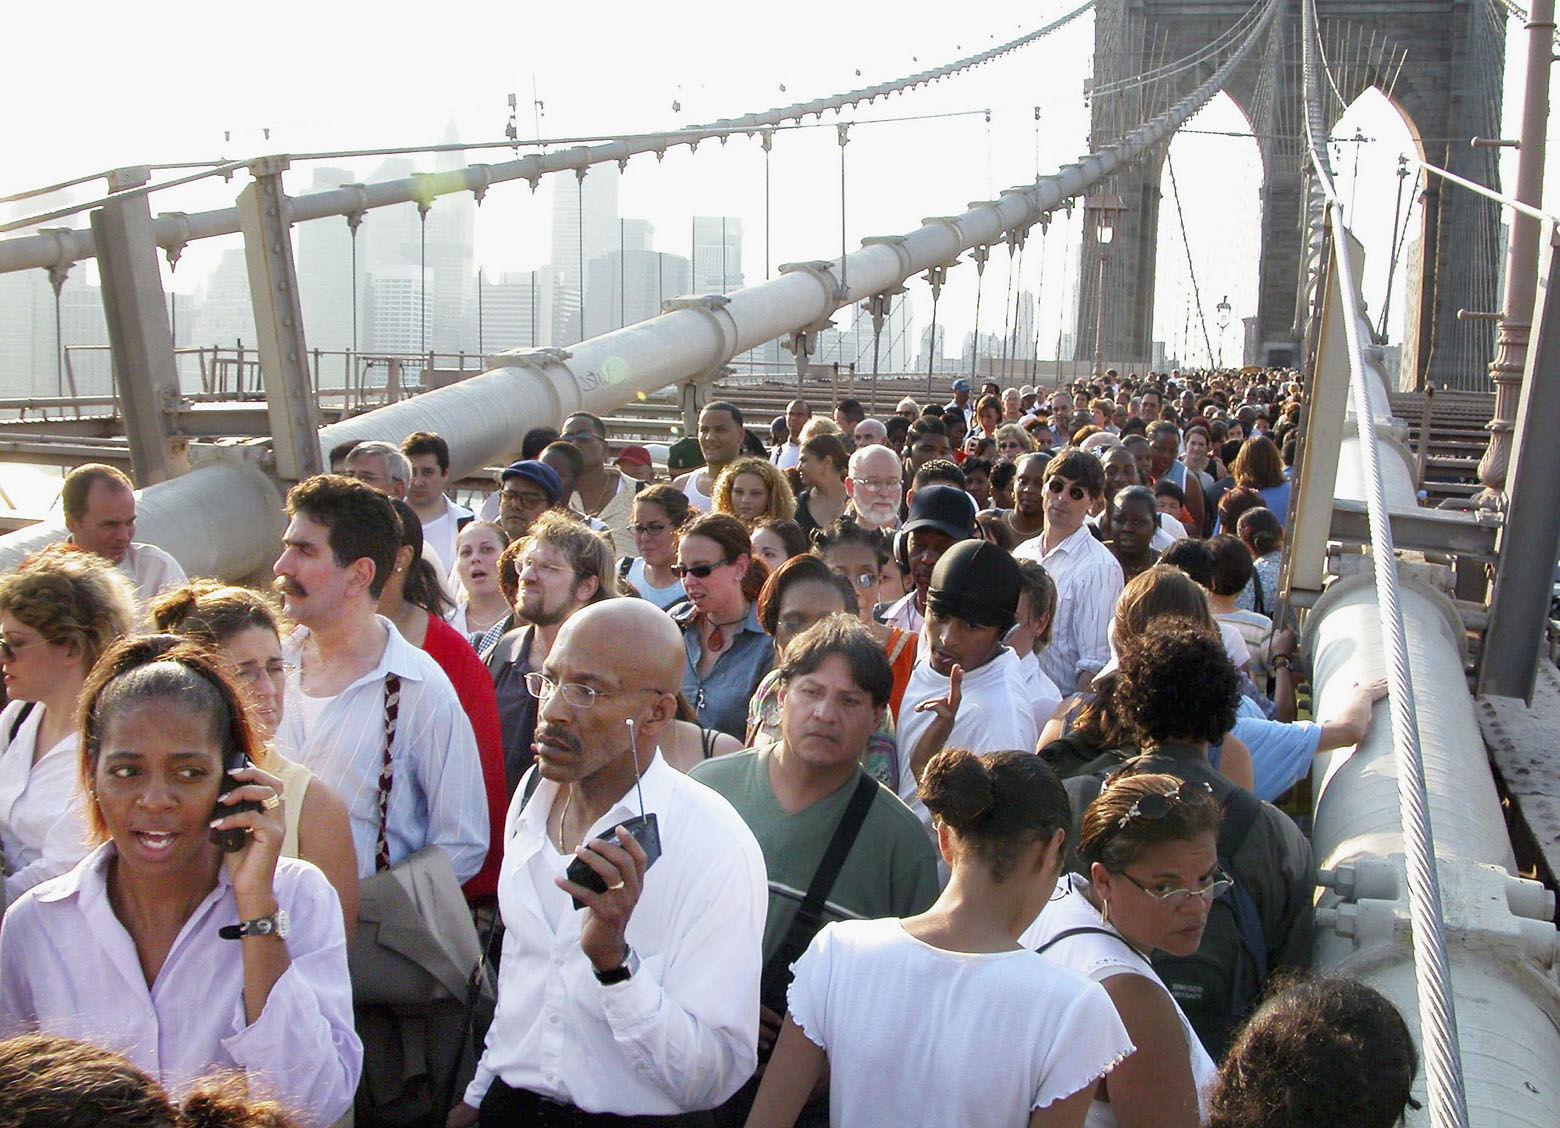 NEW YORK - AUGUST 14:  People walk down Brooklyn Bridge during a massive blackout August 14, 2003 in New York City. Officials from the Department of Homeland Security said there were no indications that terrorists were responsible for the blackout that has also affected Ohio, and Canada. (Photo by Jonathan Fickies/Getty Images)